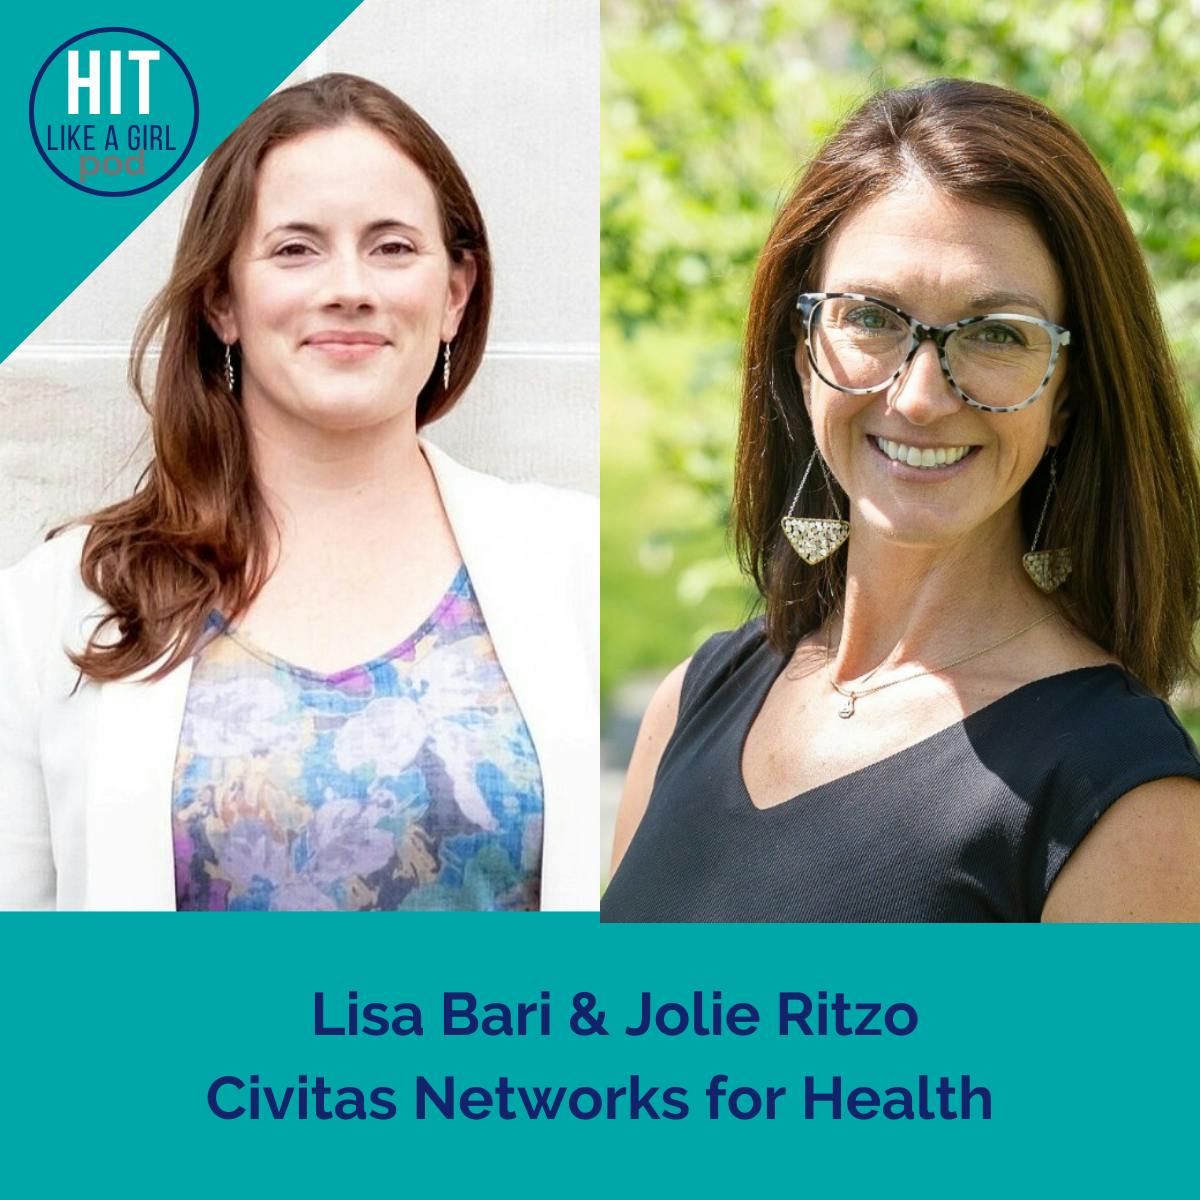 Networked for Change: Empowering Health Innovators and Communities